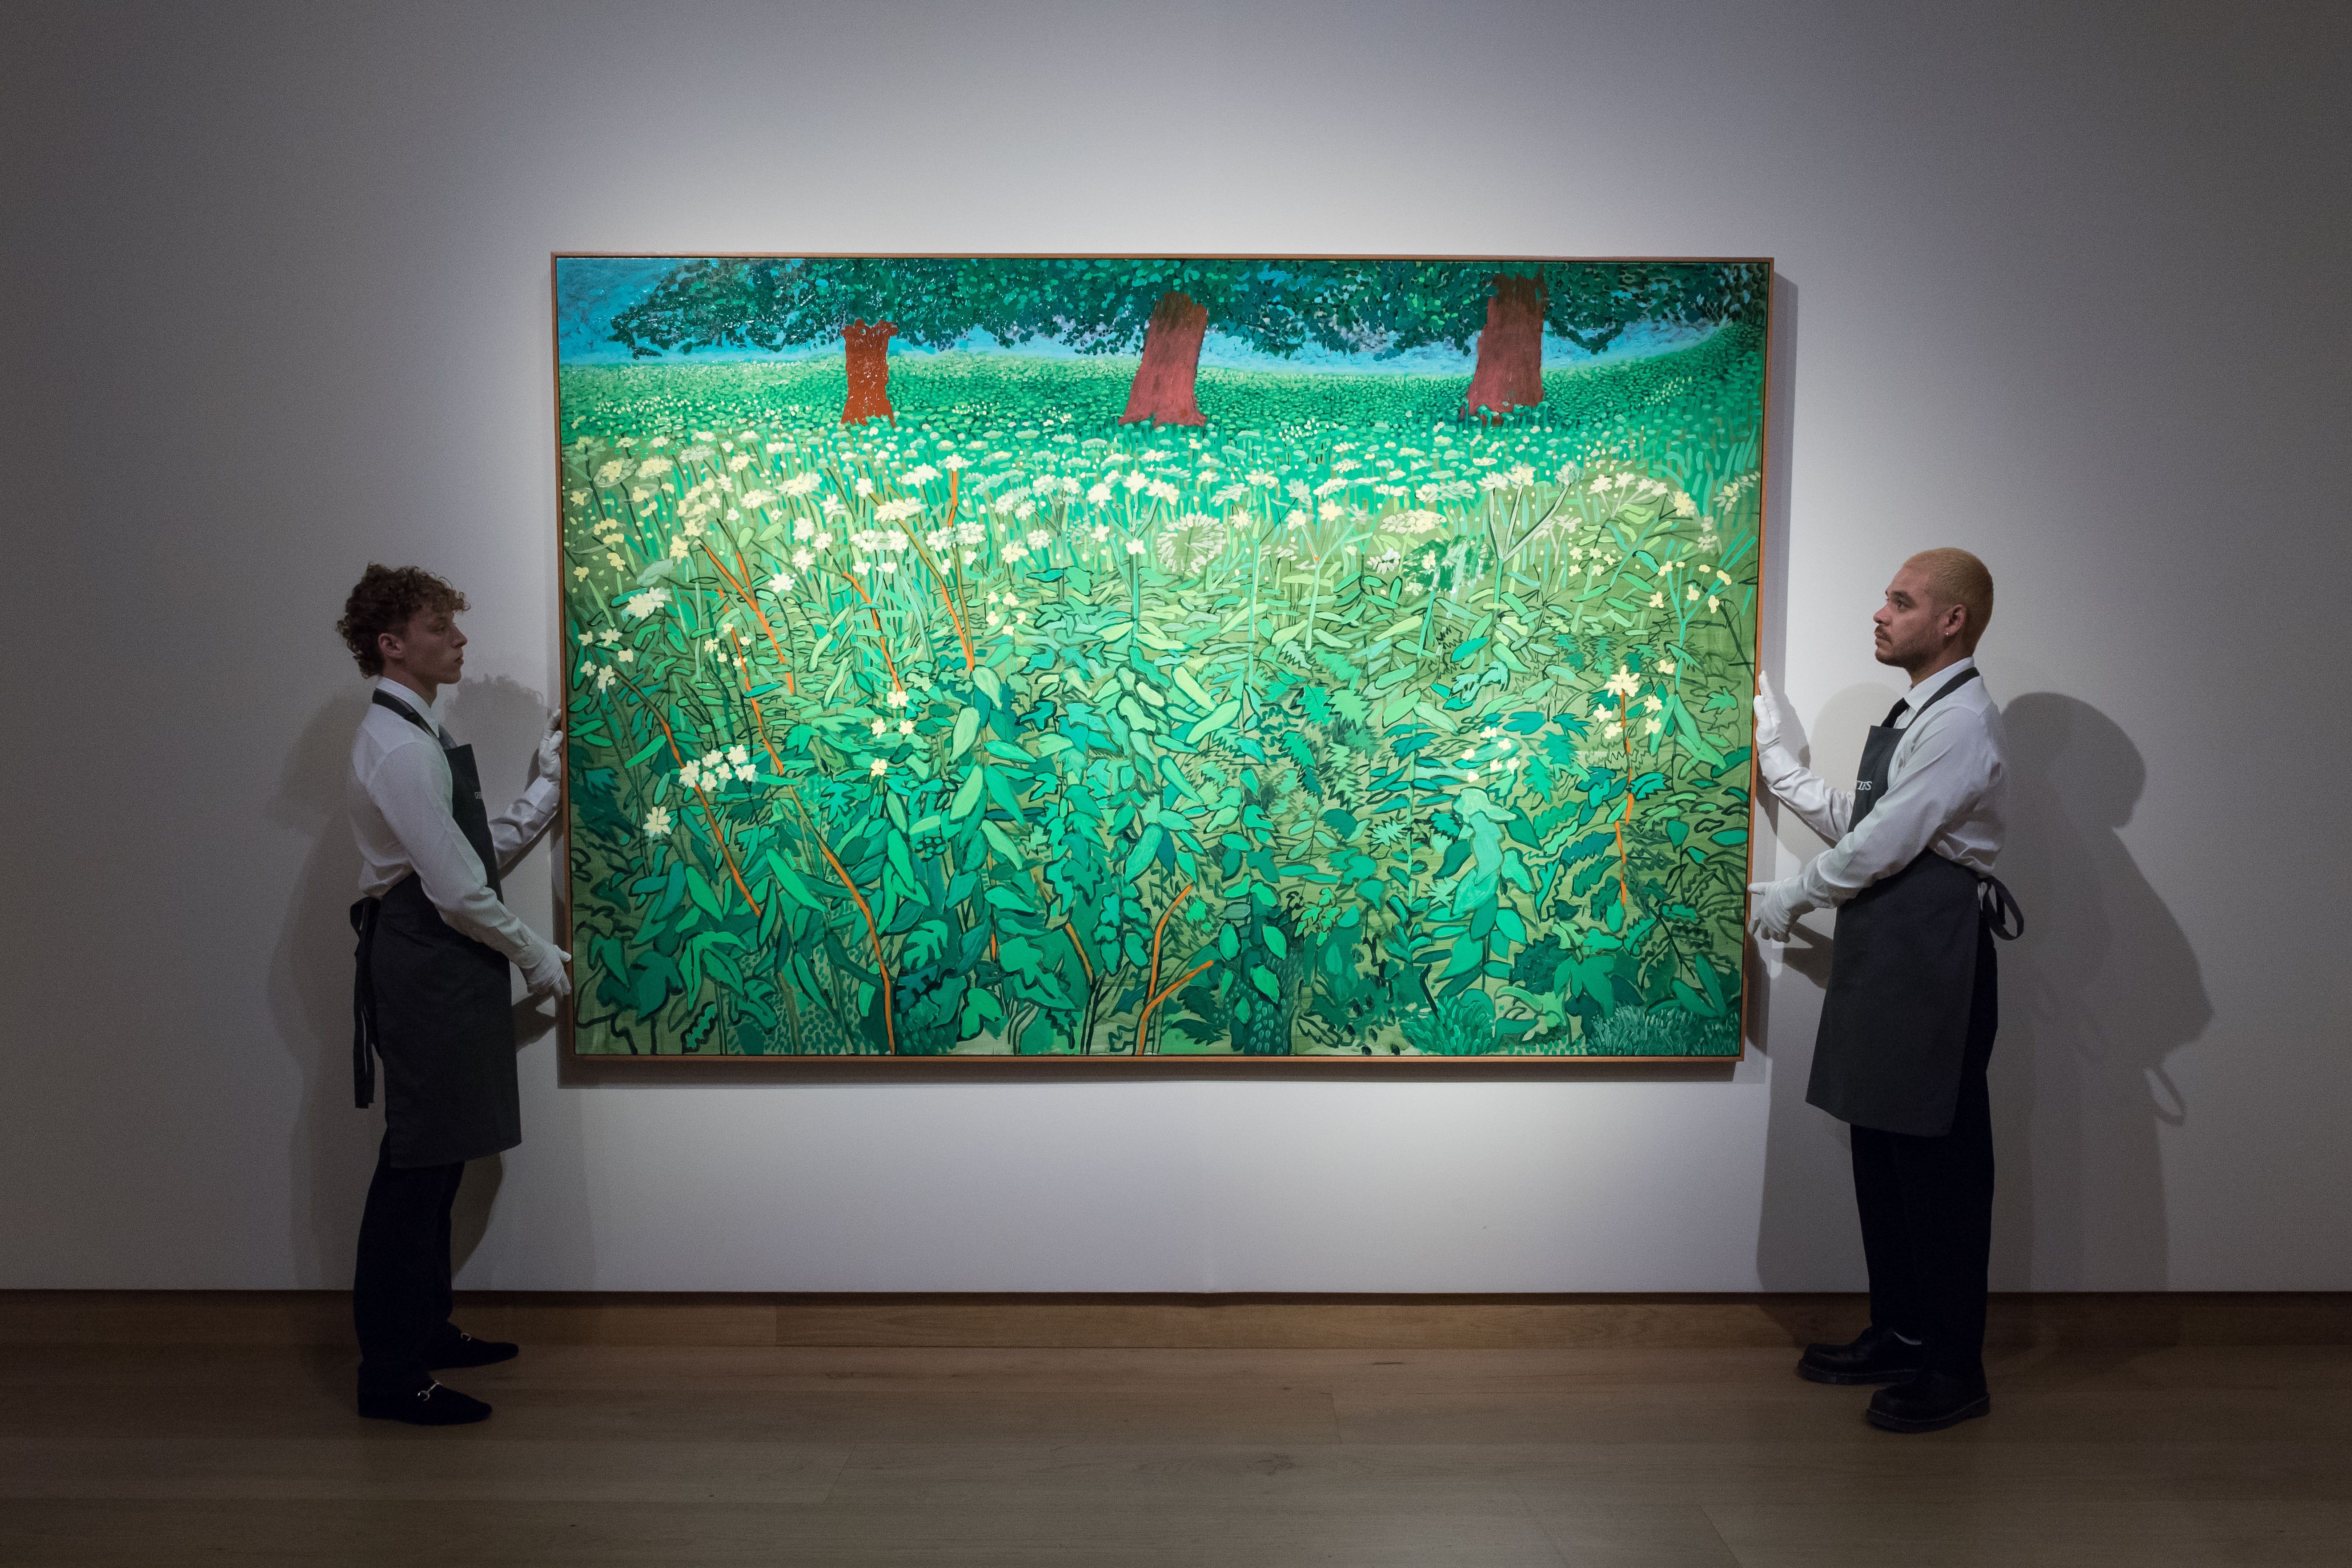  Art handlers hold a painting titled 'Queen Anne's Lace Near Kilham' by David Hockney in London.